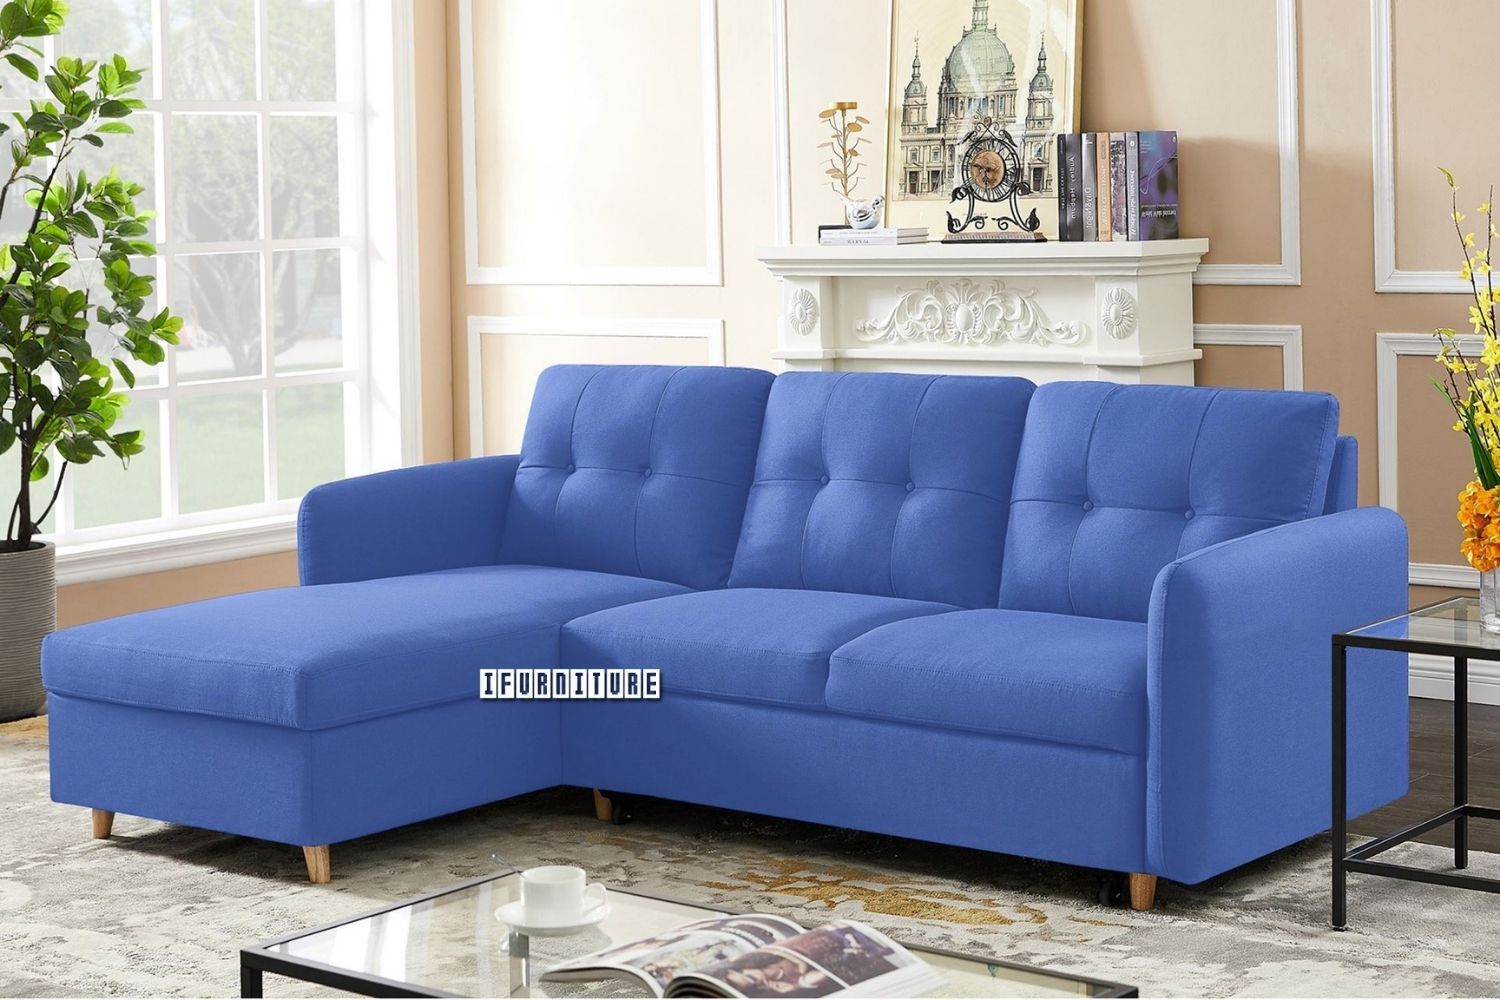 kayden fabric sectional sofa bed with storage